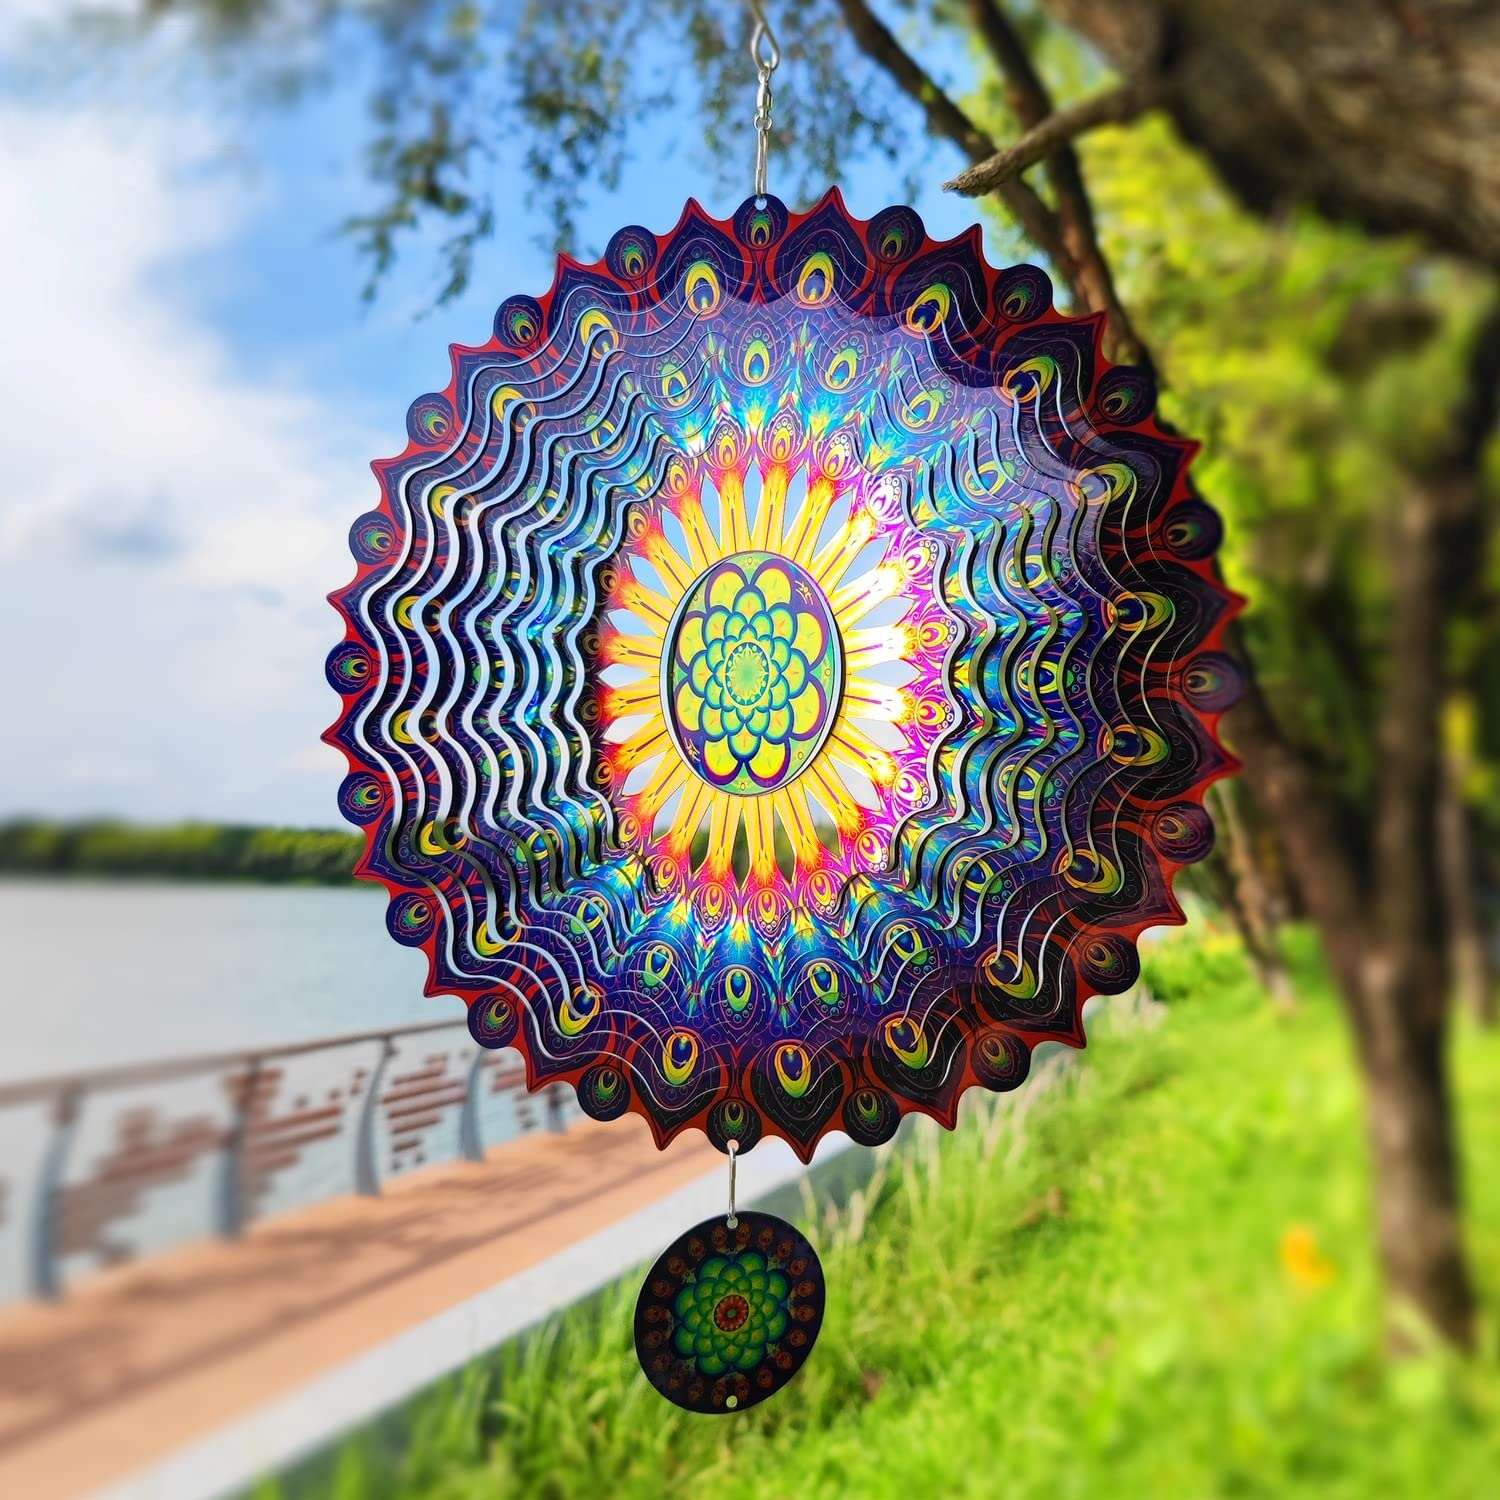 Stainless Steel Wind Spinner - Stunning 3D Effect(buy 2 off 10%)